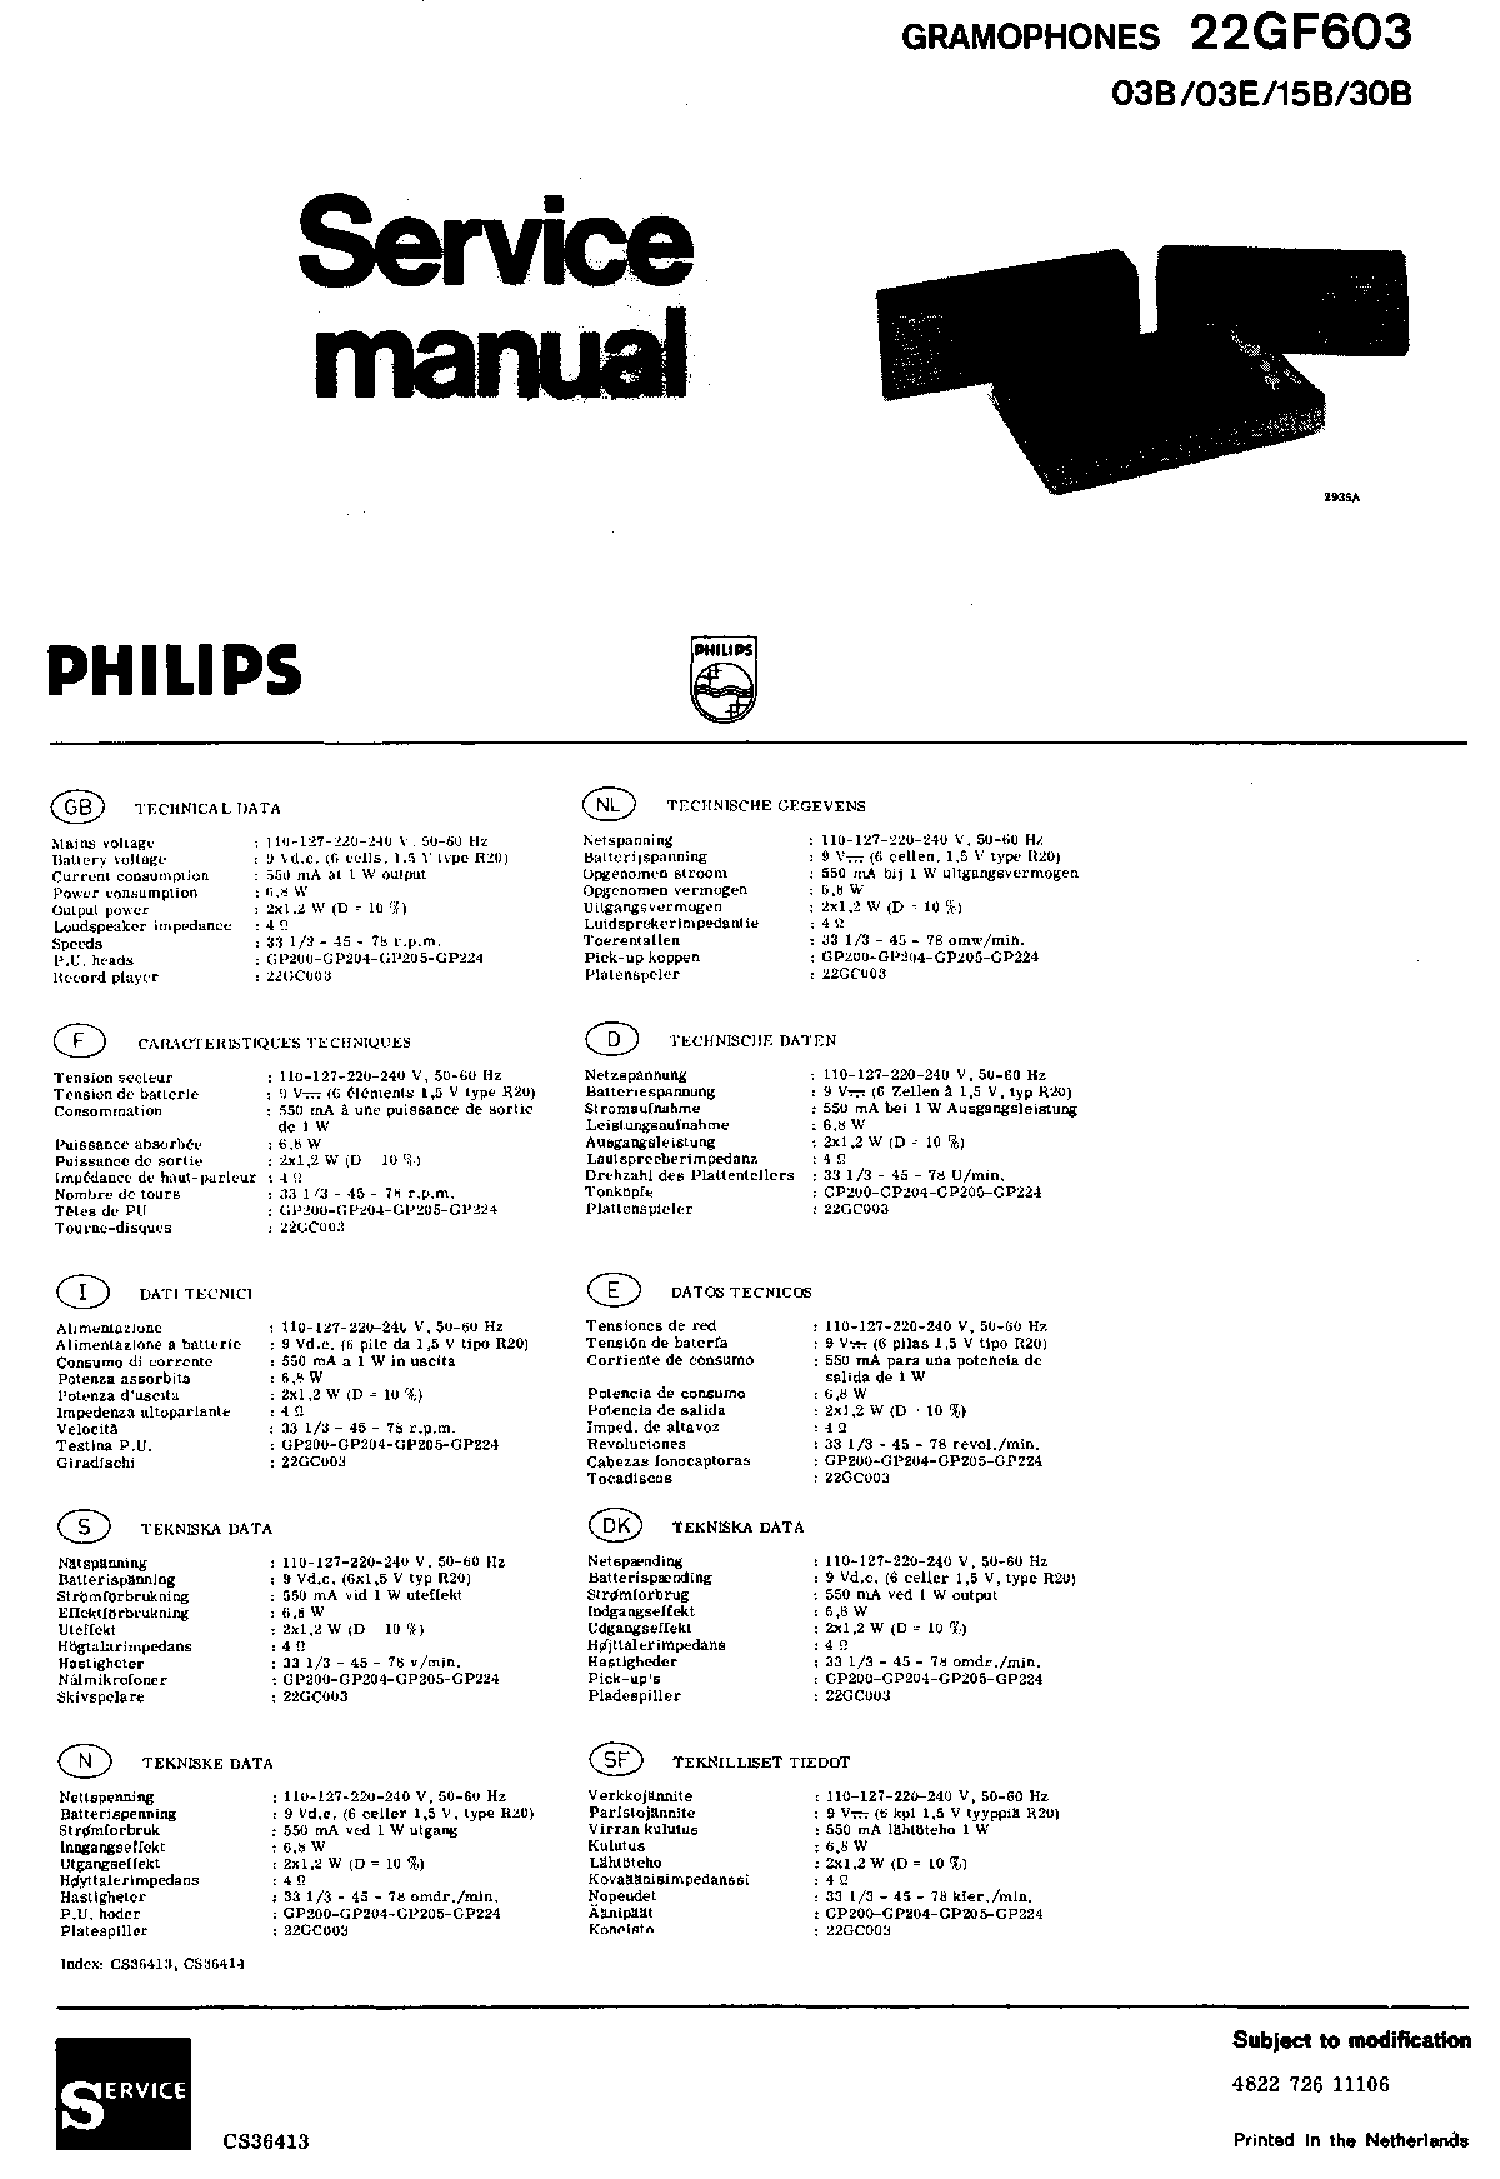 PHILIPS 22GF603 SM service manual (1st page)